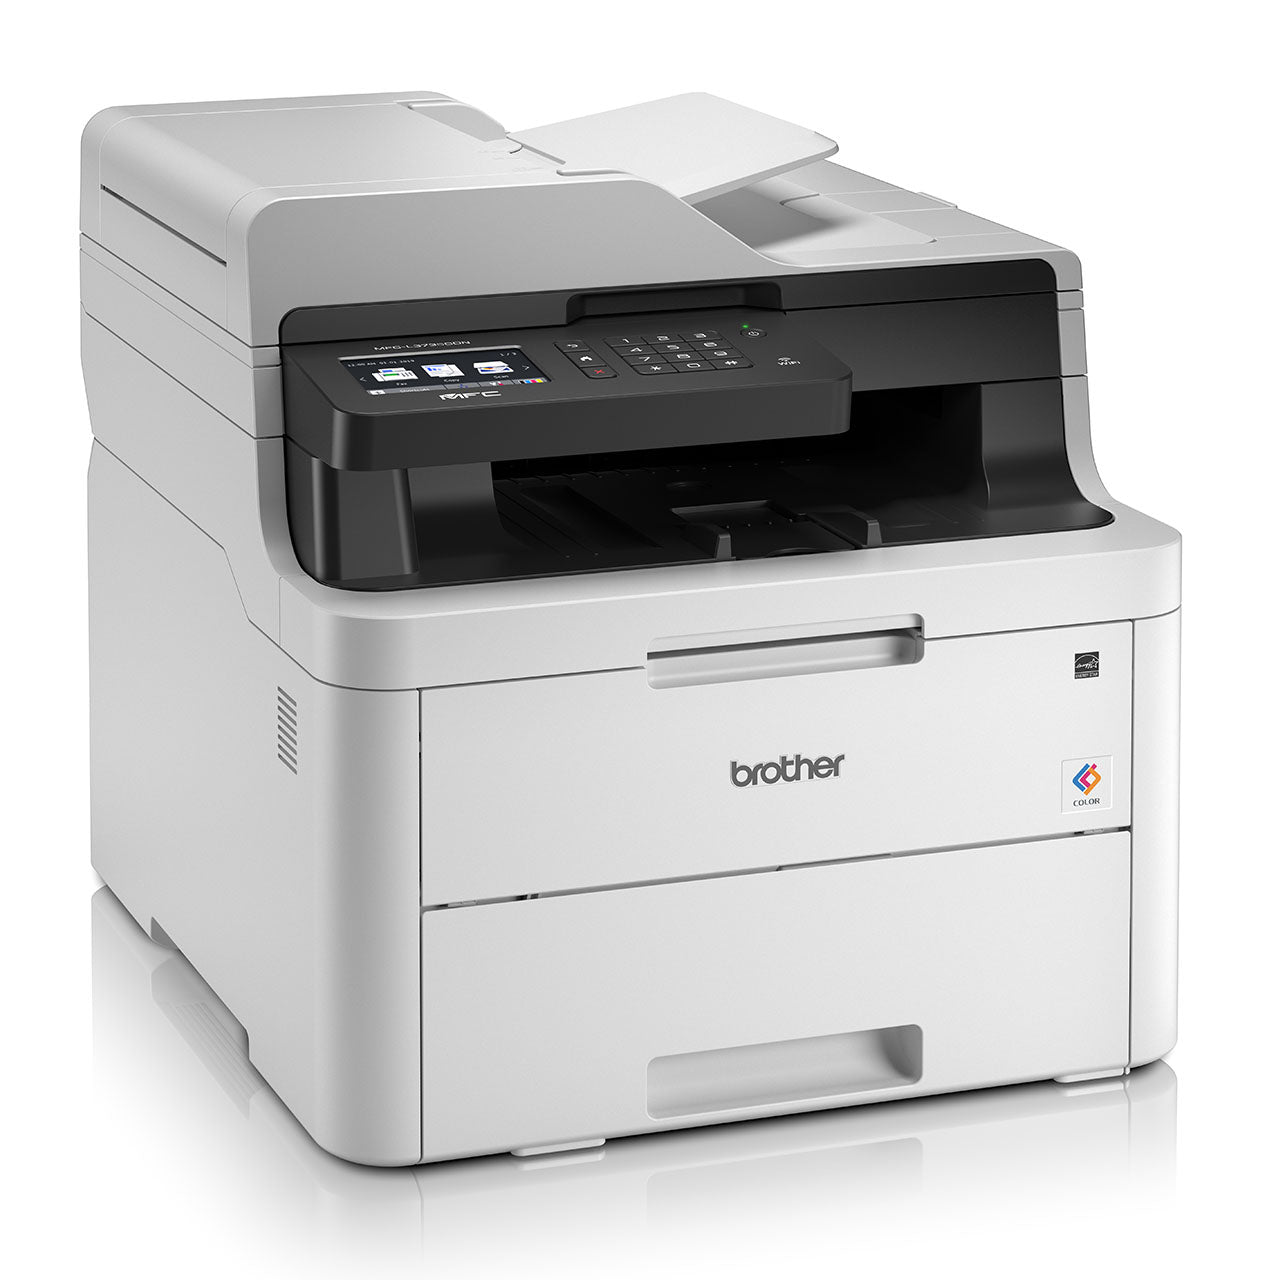 Brother Color LED Multi-Function Center with Network Connectivity Laser Printer